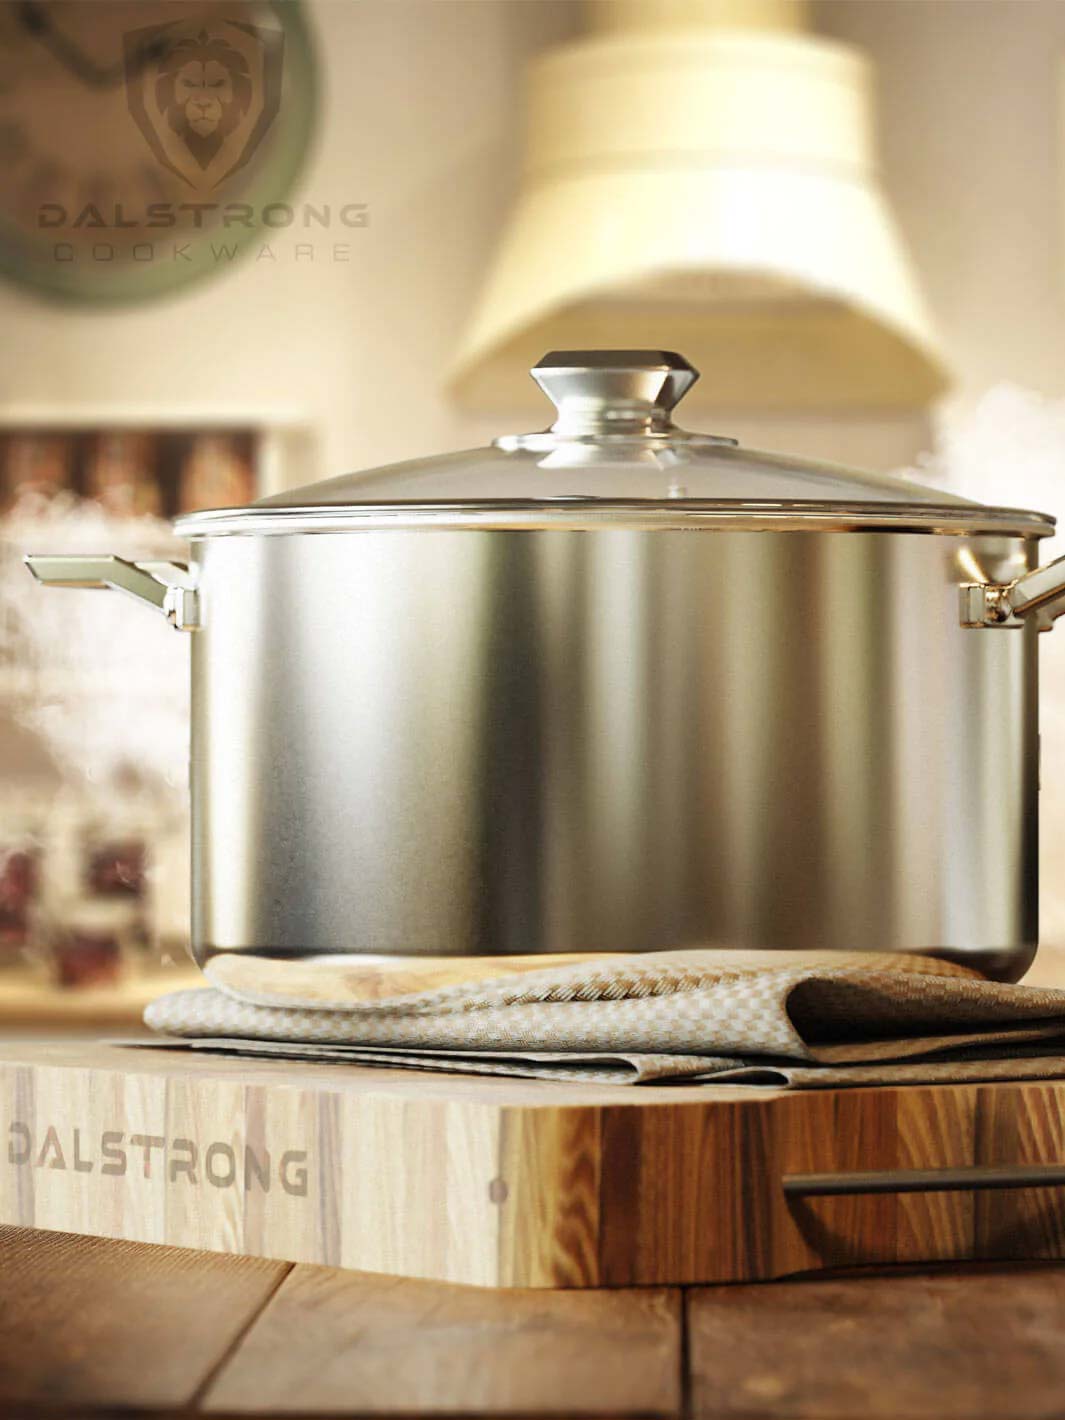 Dalstrong oberon series 8 quart stock pot silver on top of a dalstrong cutting board.